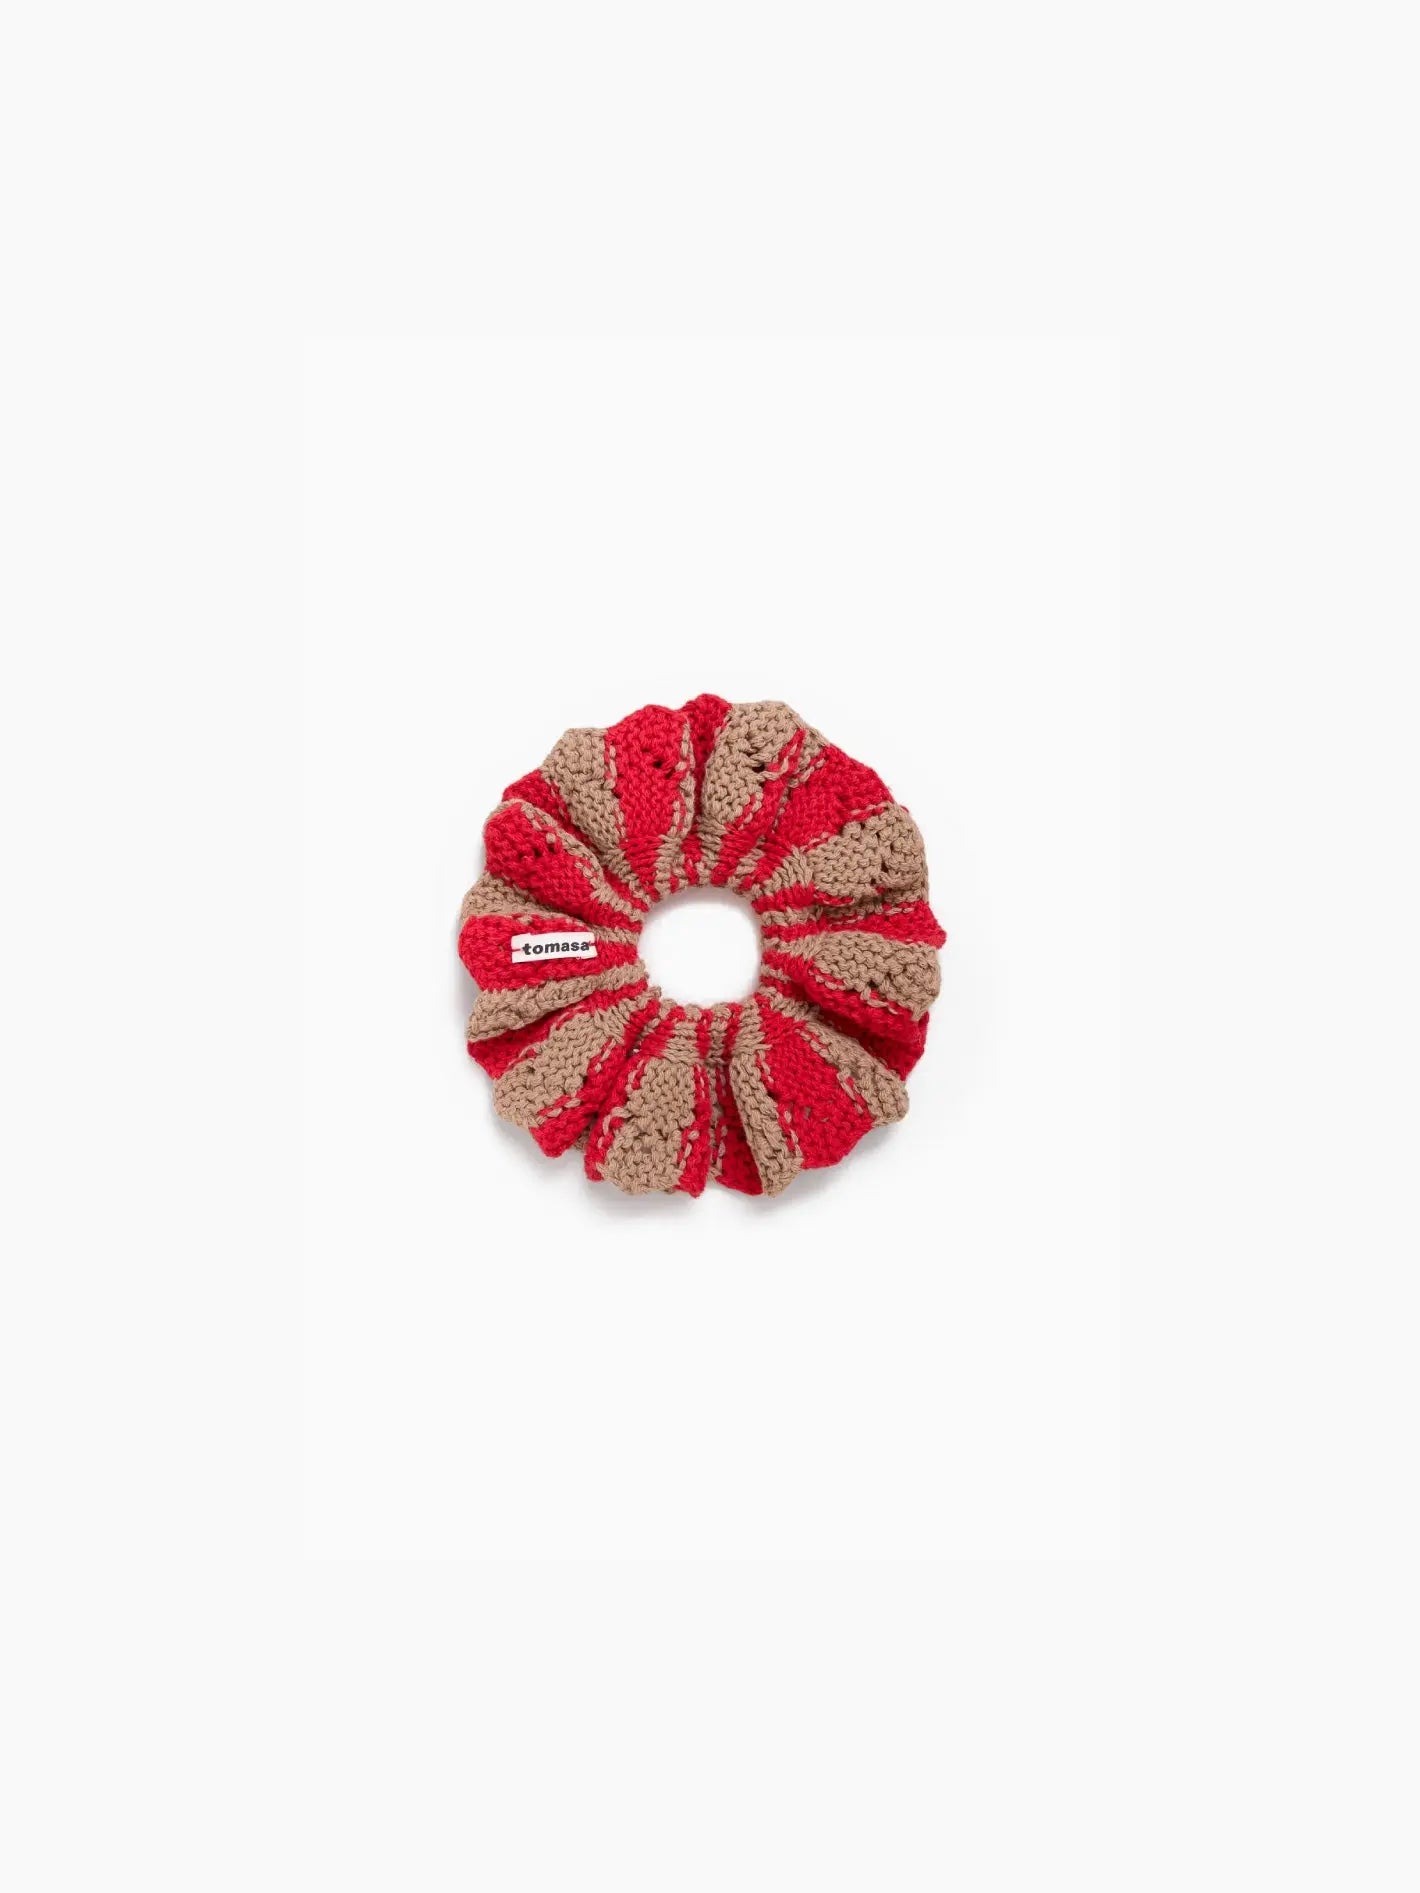 A Fernandita Scrunchie Amapola made of red and beige yarn with a textured pattern. It has a small rectangular white tag attached with red text. Displayed against a plain white background, this elegant accessory by Tomasa is available exclusively at Bassalstore in Barcelona.